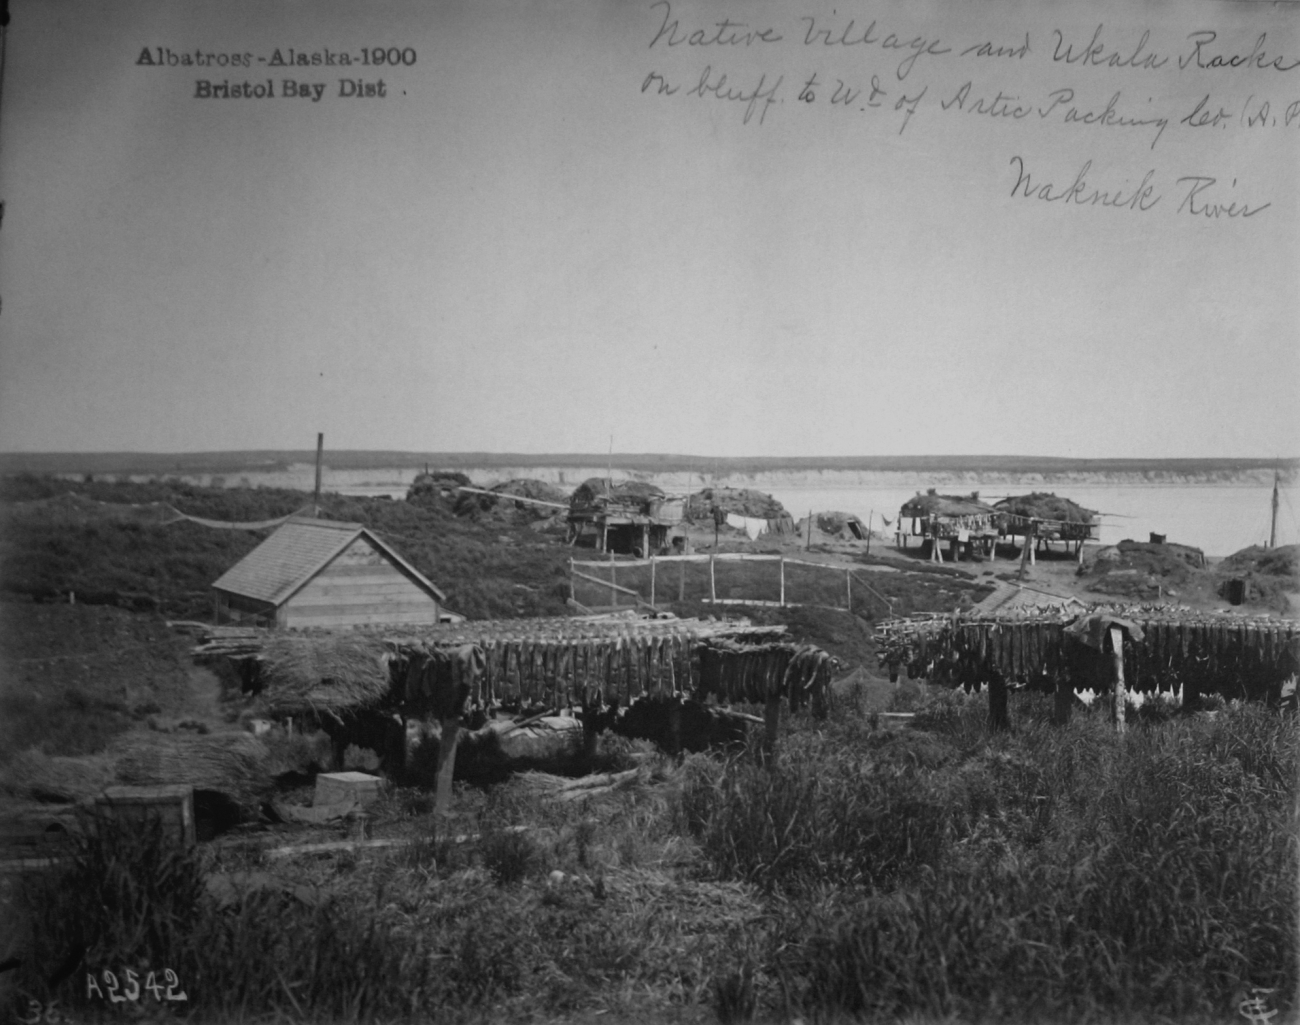 Albatross, AK, 1900, Bristol Bay district, native village and Ukala Rockson bluff to west of Artic Packing Co